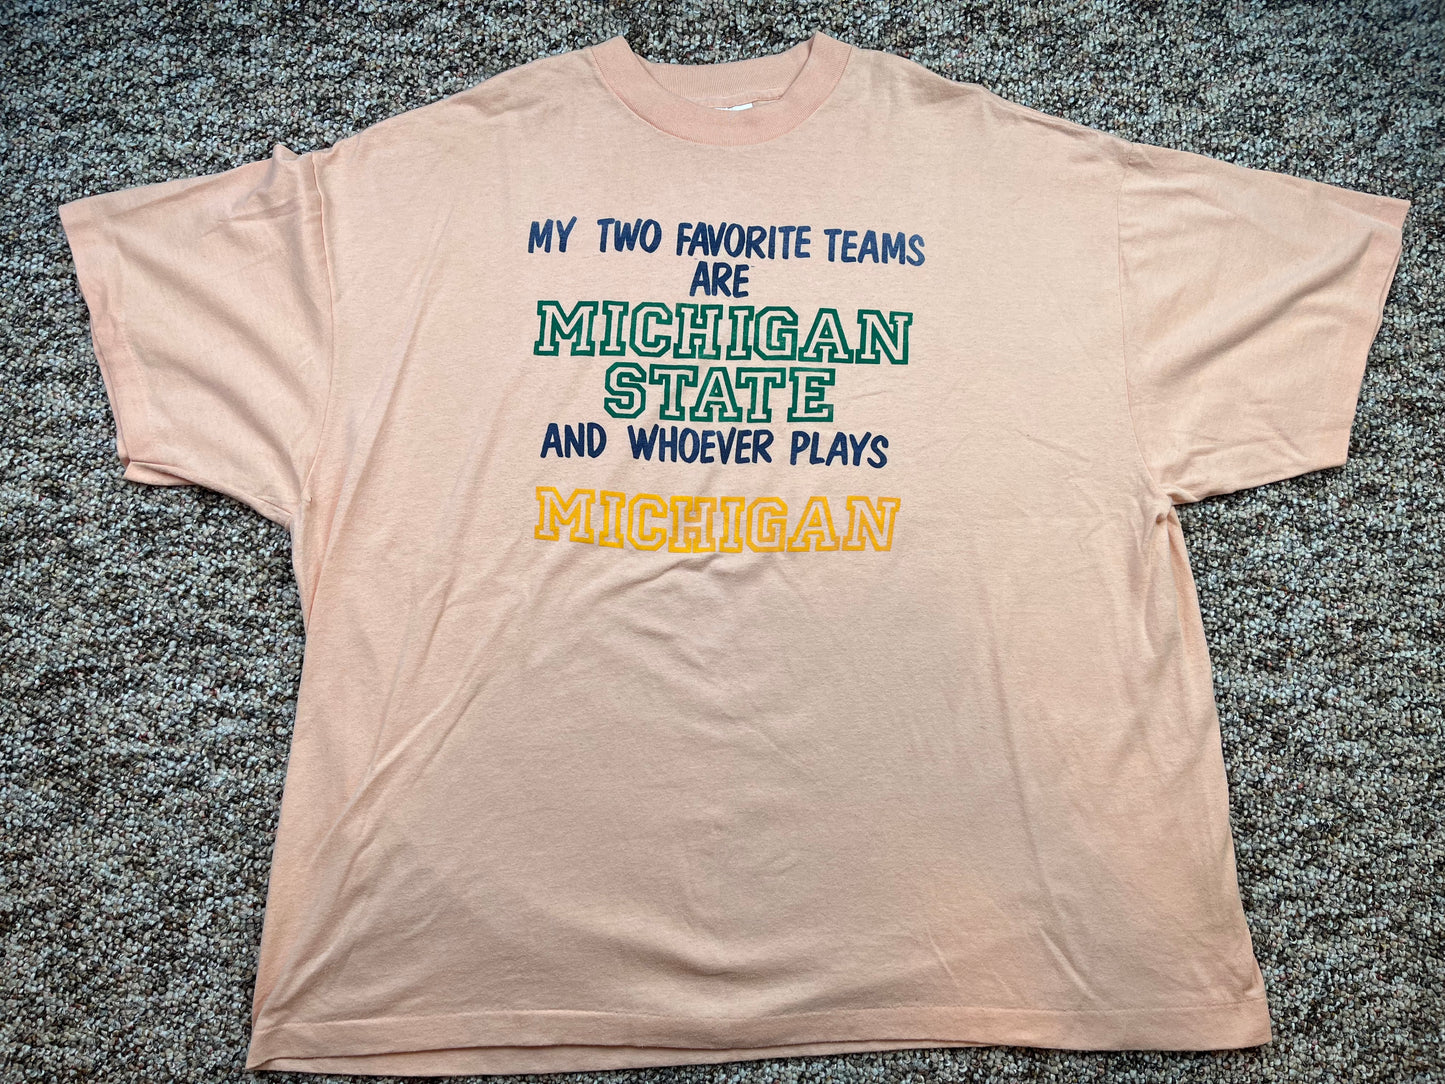 “My two favorite teams are Michigan State and whoever plays Michigan” Script T-Shirt